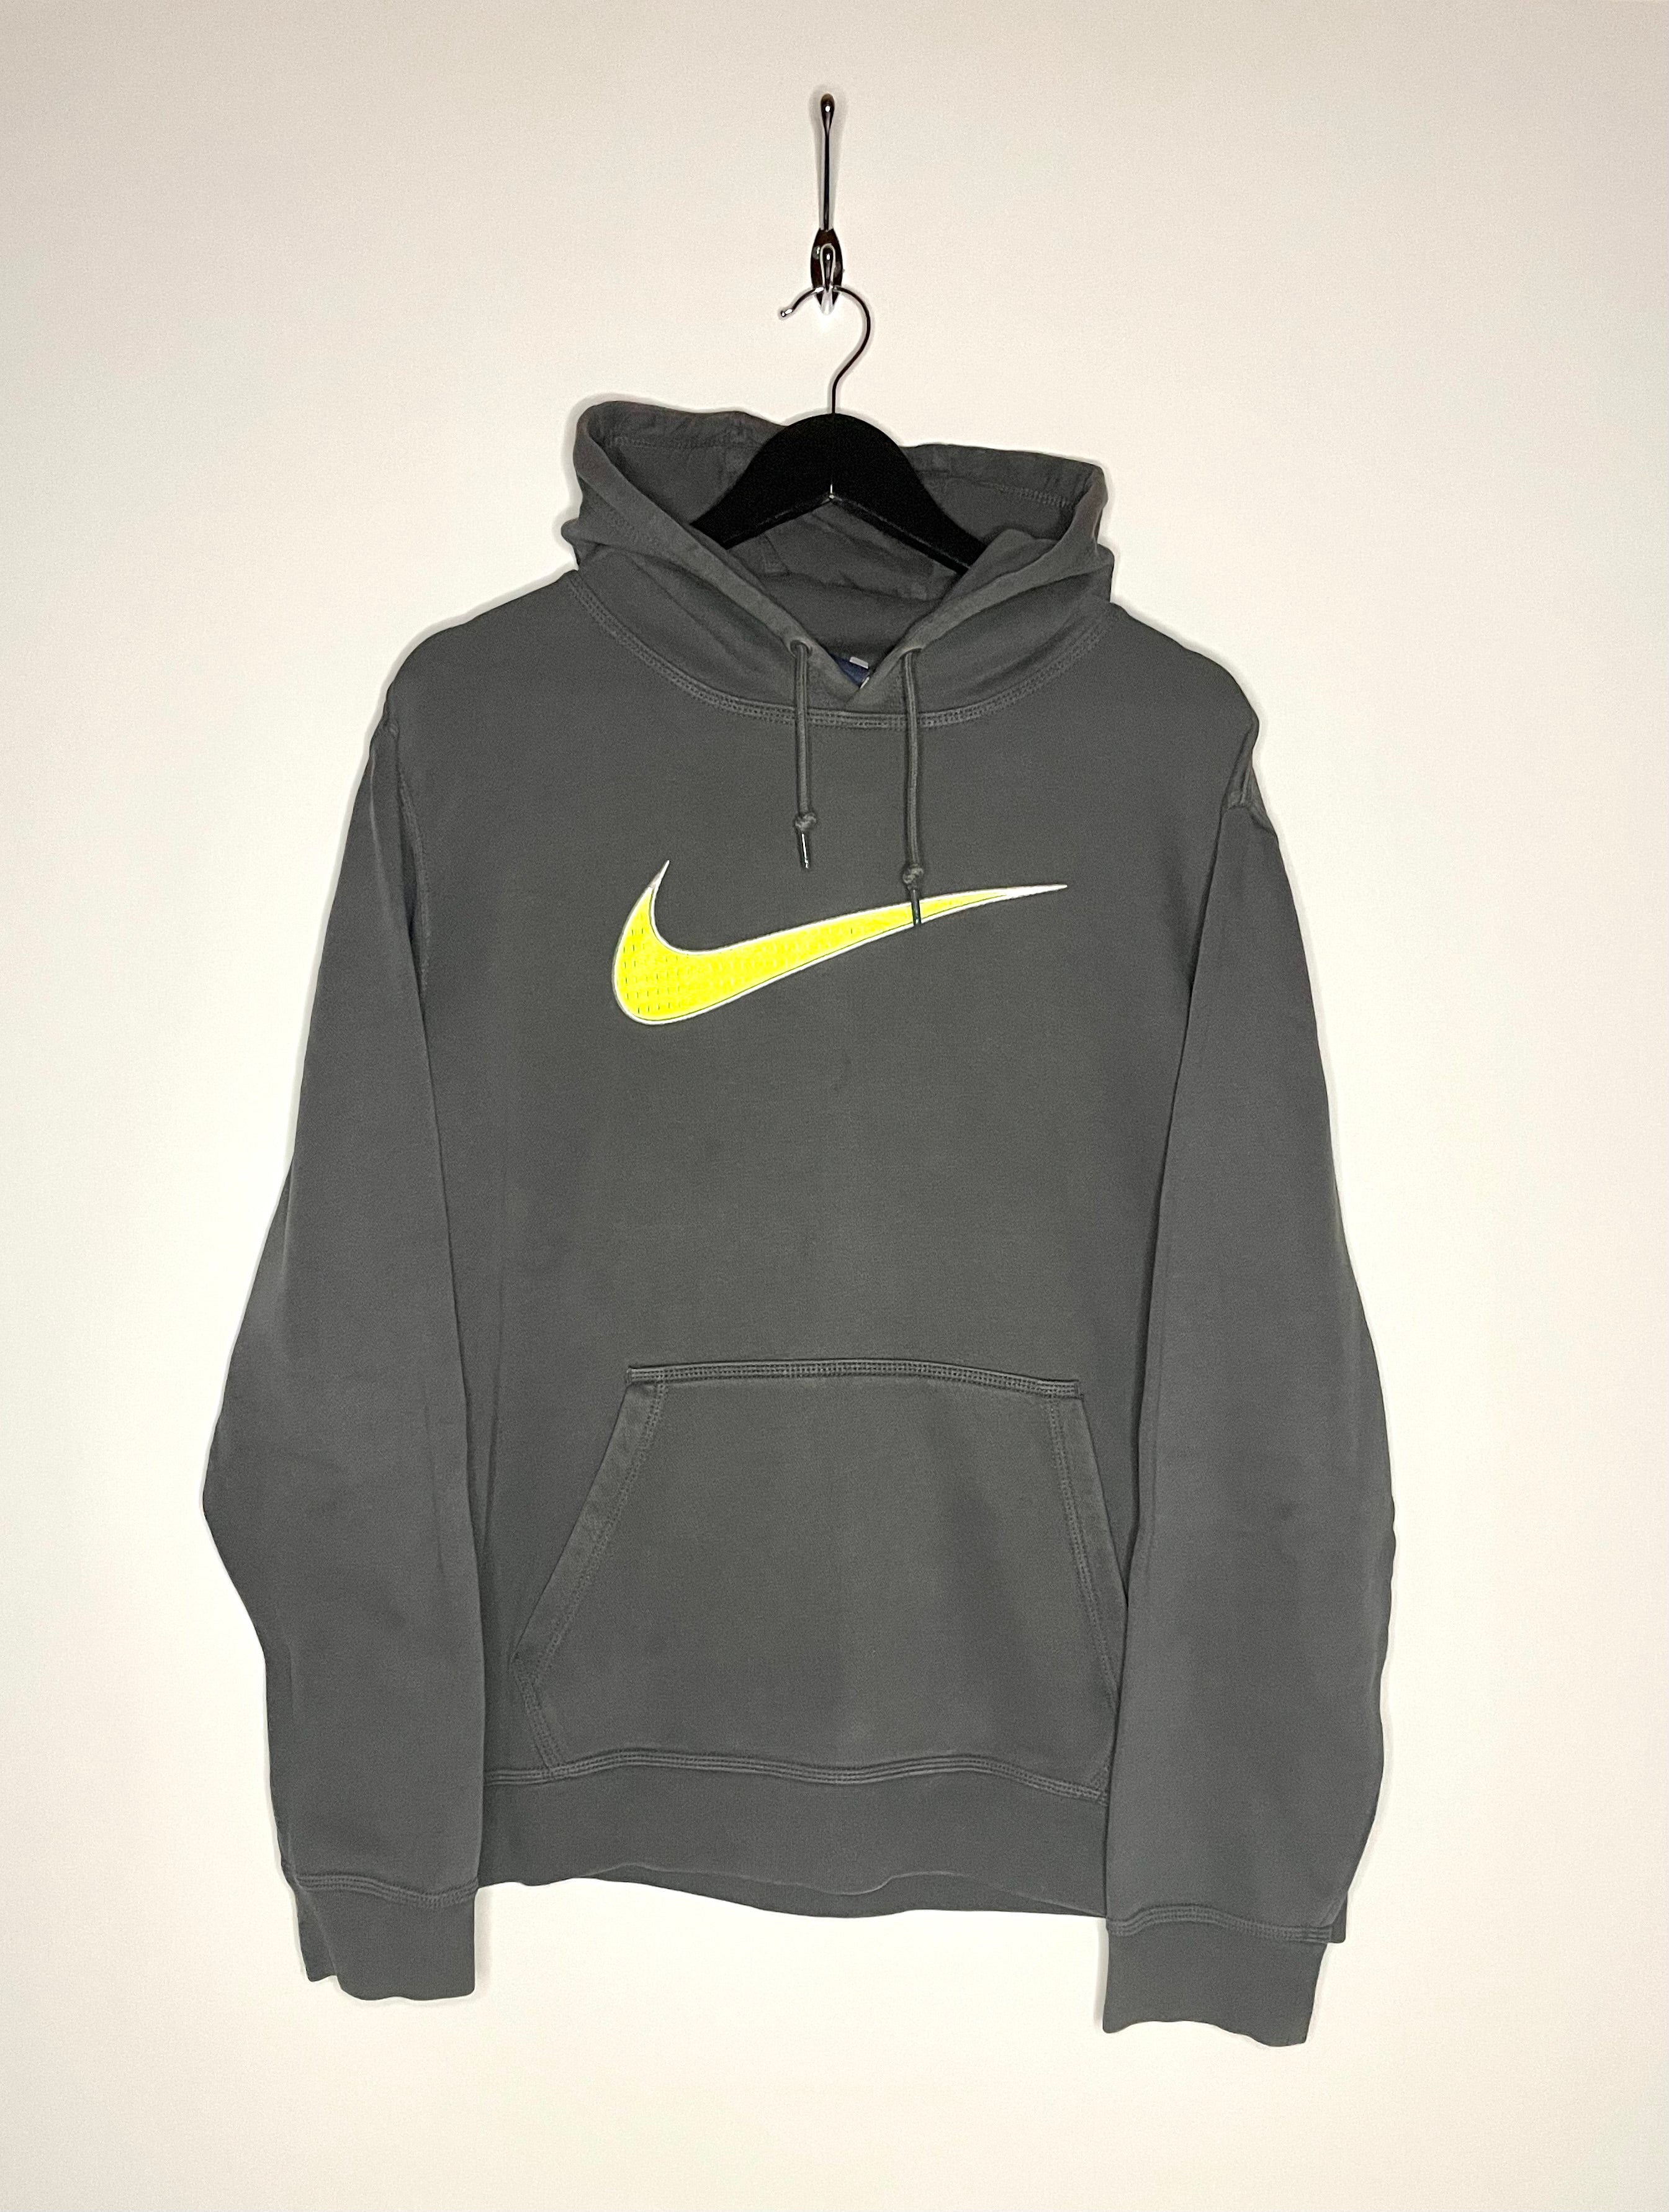 Nike Hoodie Embroidered Grey/Neon Green Size XL